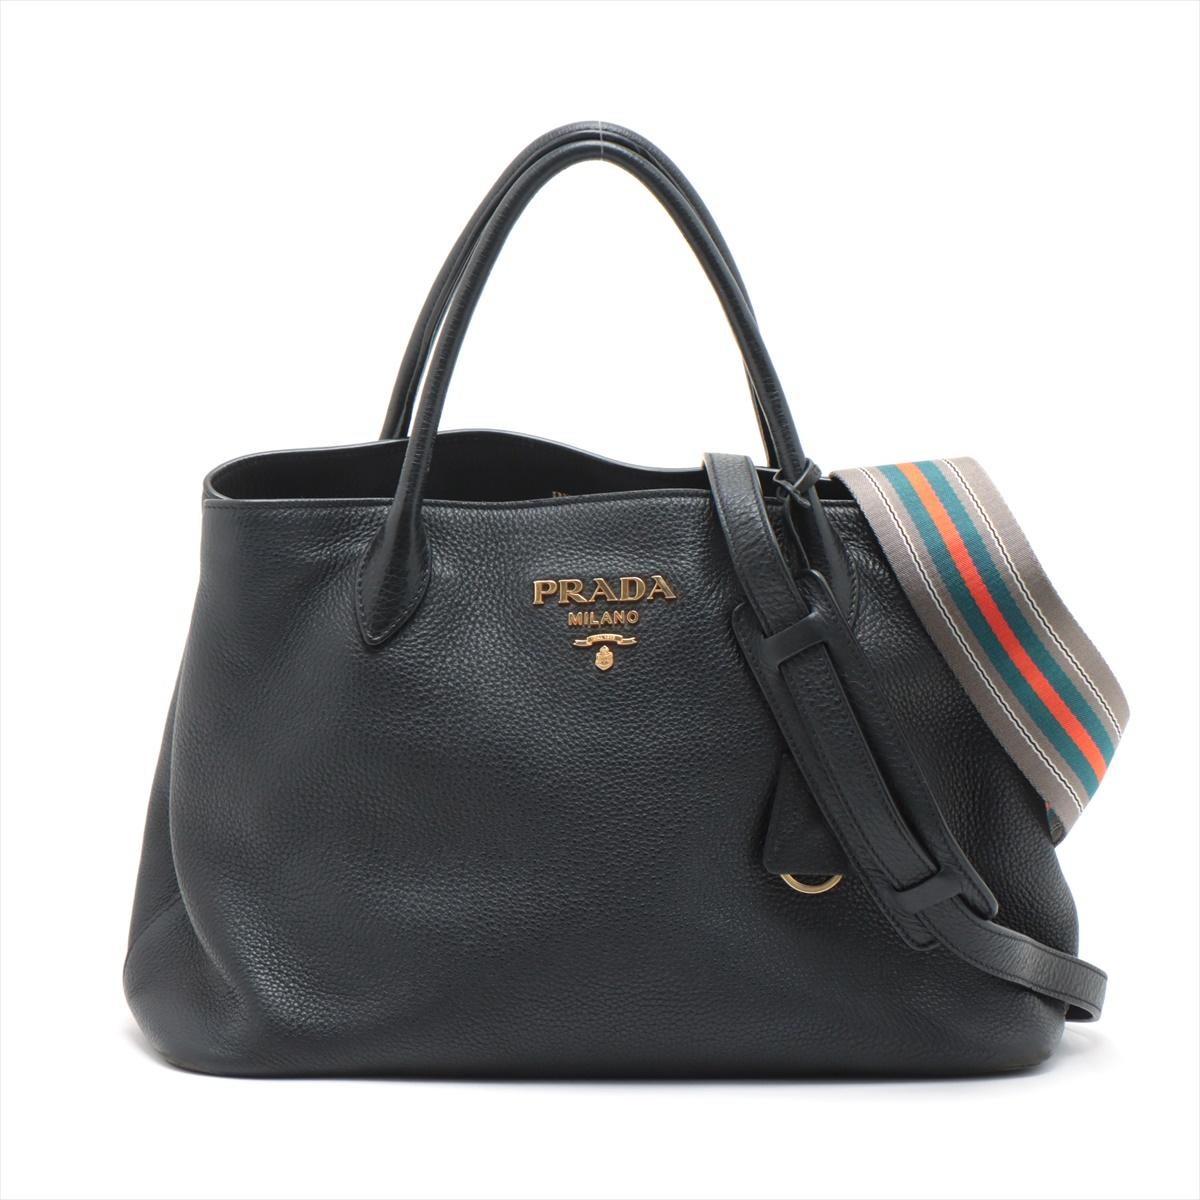 The Prada Vitello Daino Leather Two-Way Handbag in Black offers both sophistication and versatility. Crafted from the distinctive Vitello Daino leather known for its pebbled texture, the bag exudes a timeless elegance in classic black. The two-way